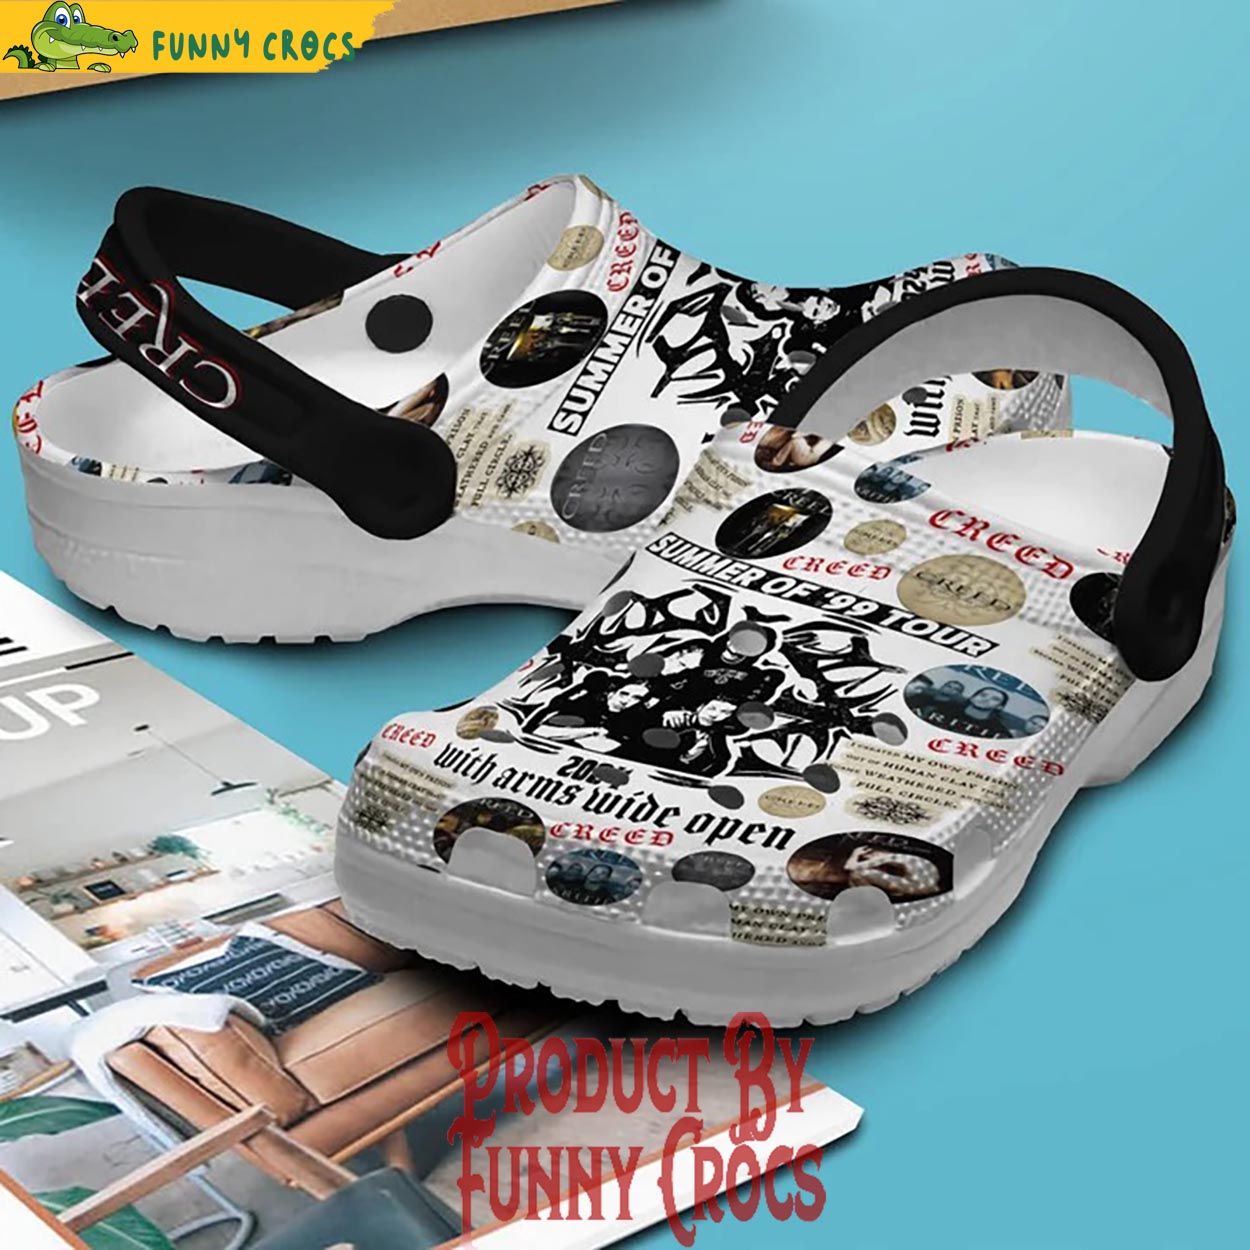 Creed Summer Of 99 Tour Crocs Shoes - Discover Comfort And Style Clog ...